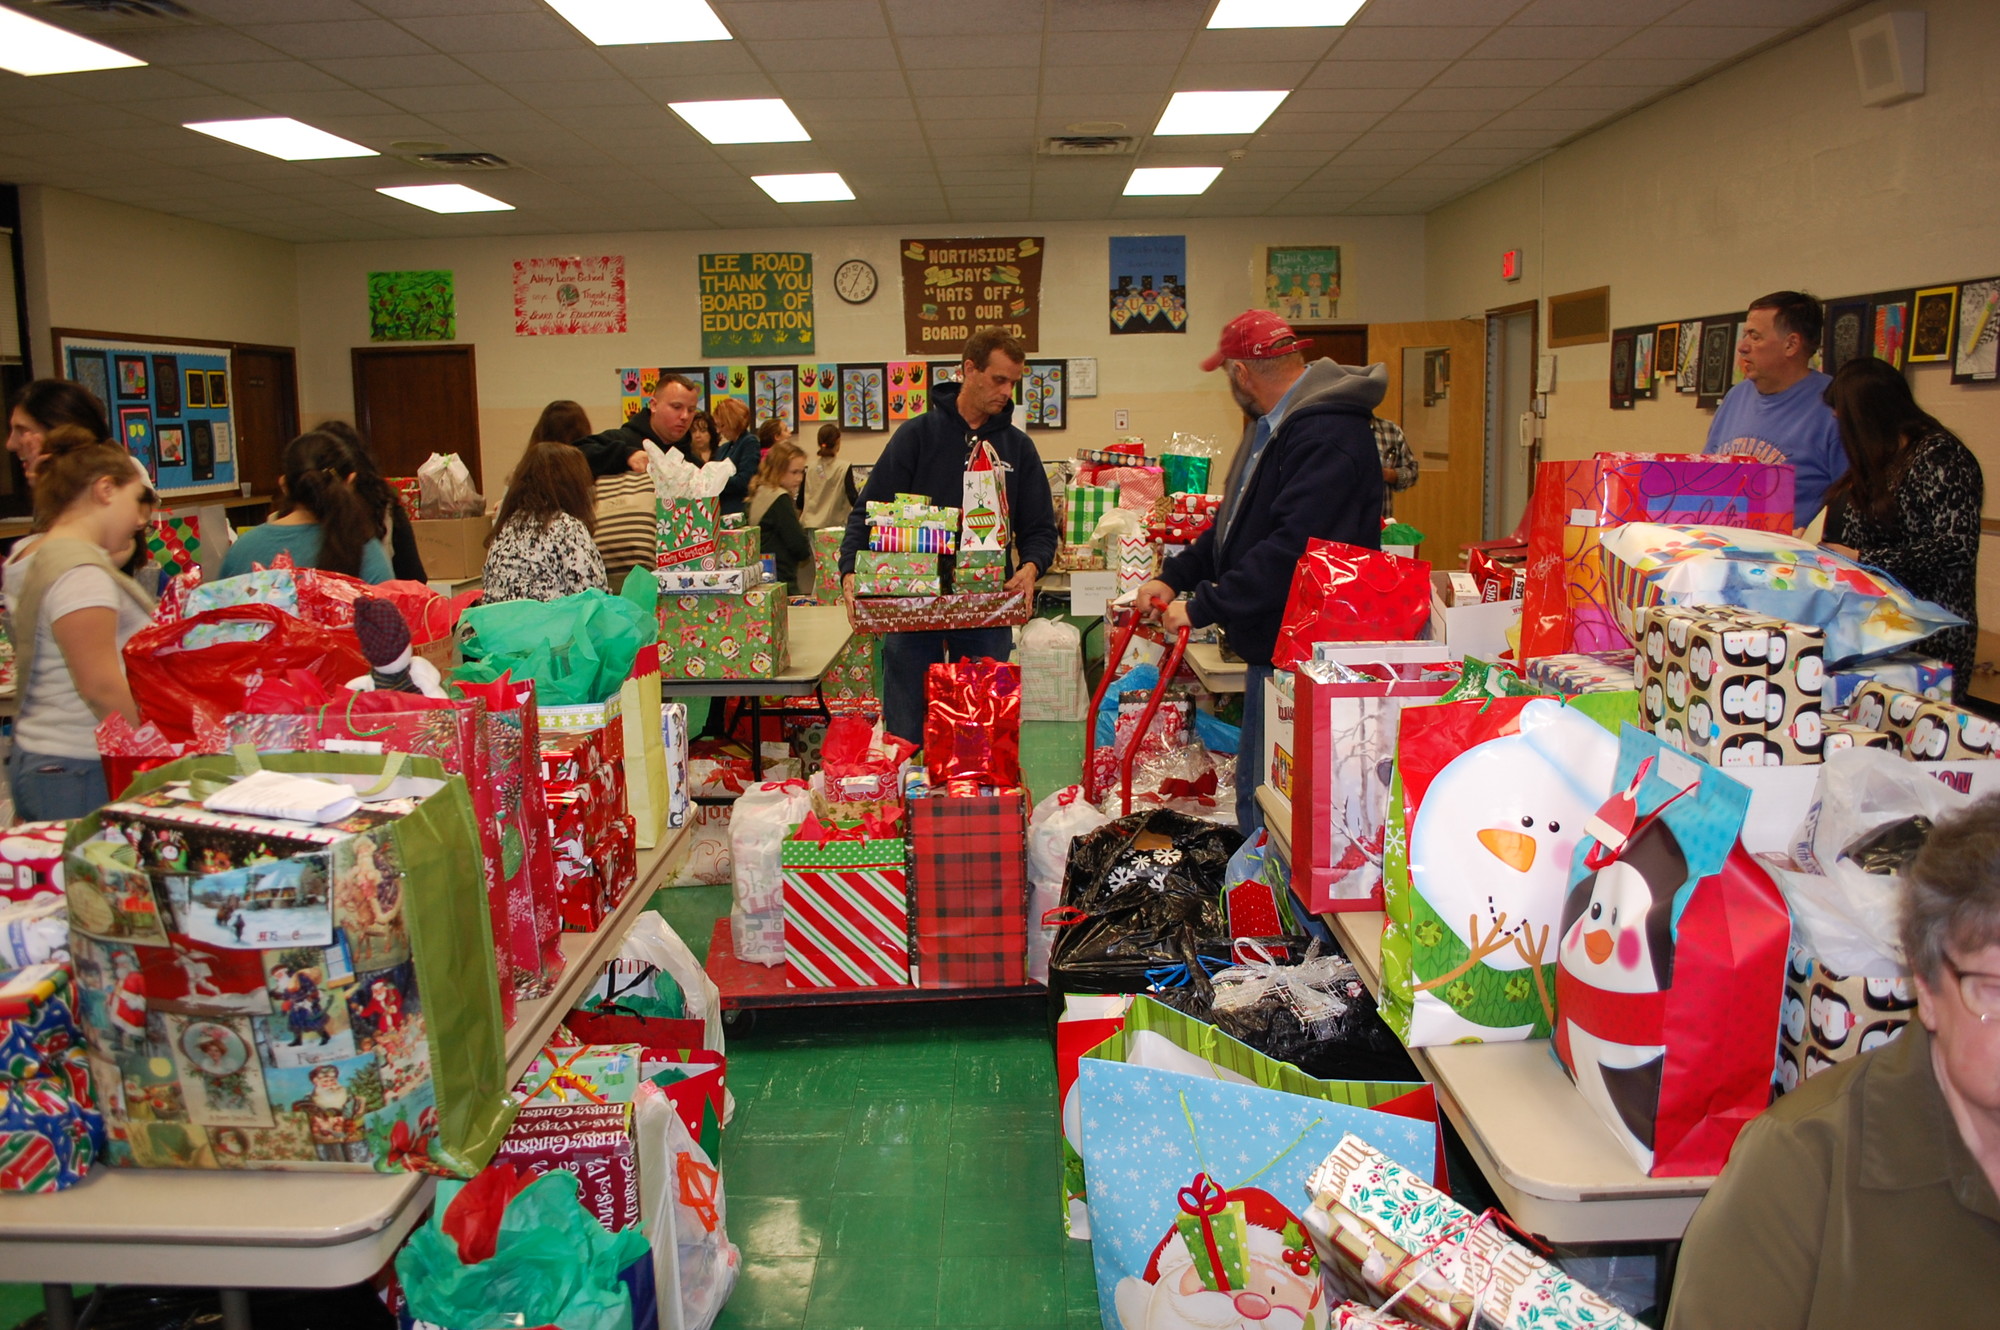 The Board room at the Levittown Memorial Education Center, at left, was filled with gifts on Dec. 15 for needy families in the district.